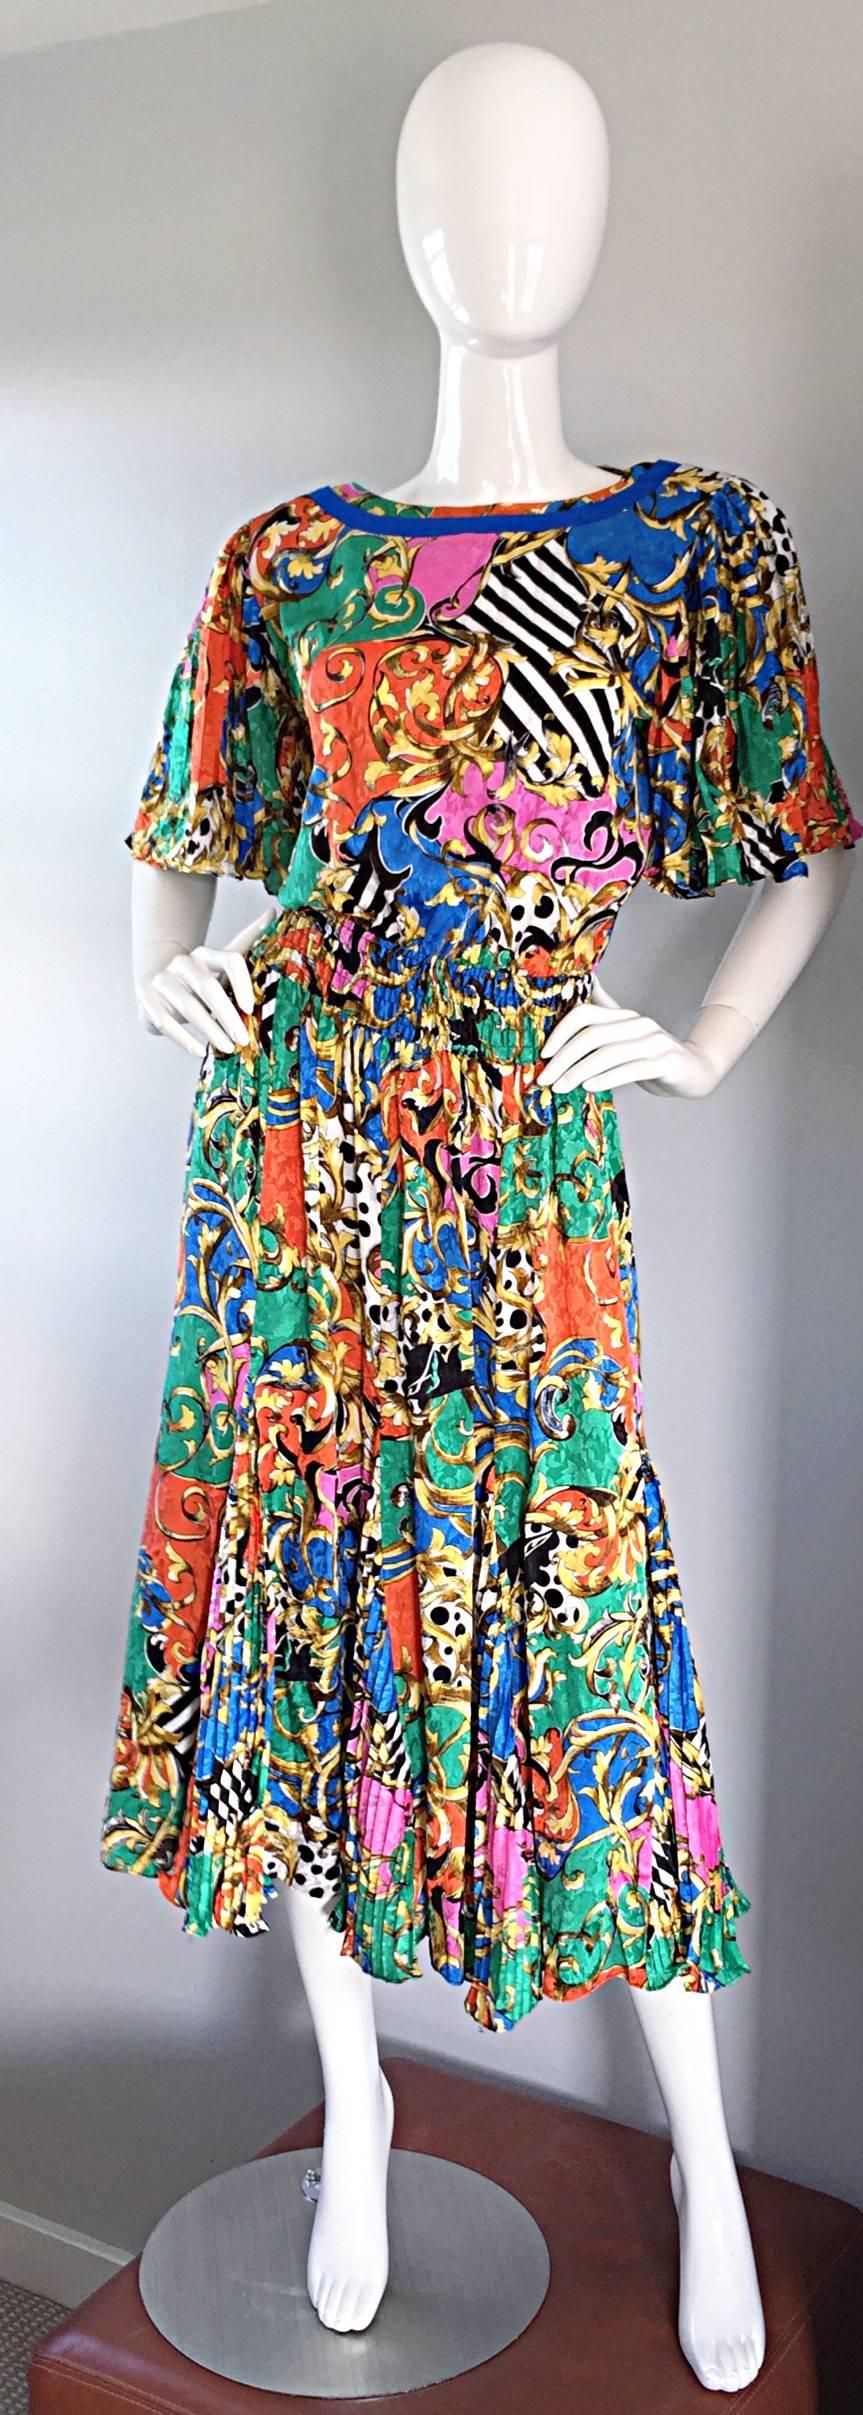 Amazing vintage Diane Freis / Diane Fres psychedelic colorful dress! Features a variety of prints throughout, including stripes and baroques. Pleated 'flutter' sleeves, with matching pleated skirt, that looks sensational on! As with most Diane Freis